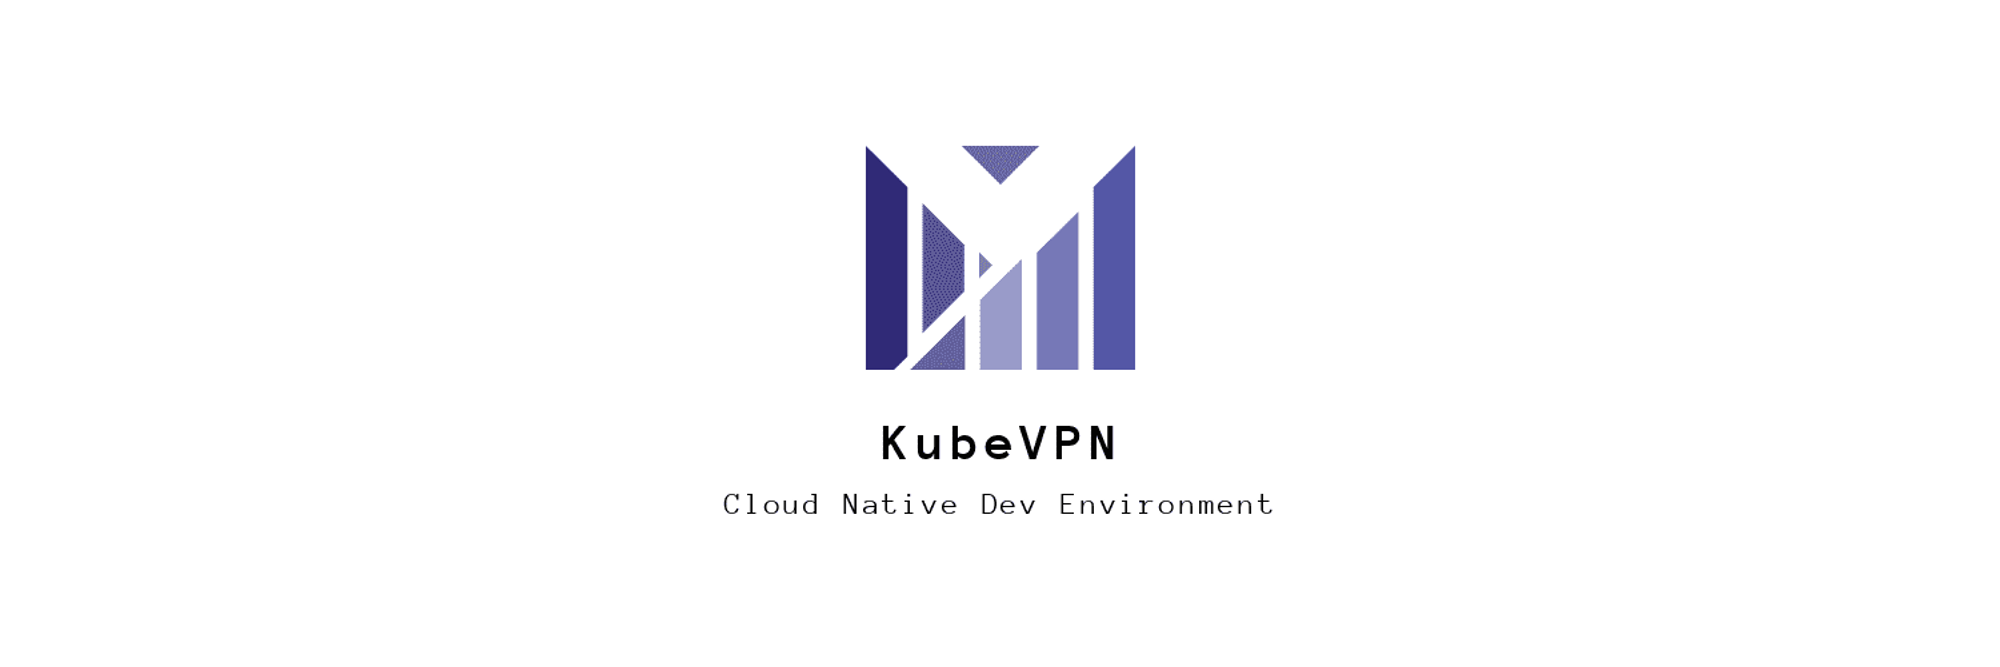 GitHub - KubeNetworks/kubevpn: KubeVPN is Cloud Native Dev Environment, connect to kubernetes cluster network, you can access remote kubernetes cluster network, remote kubernetes cluster service can also access your local service. and more, you can run your kubernetes pod on local Docker container with same environment、volume、and network.